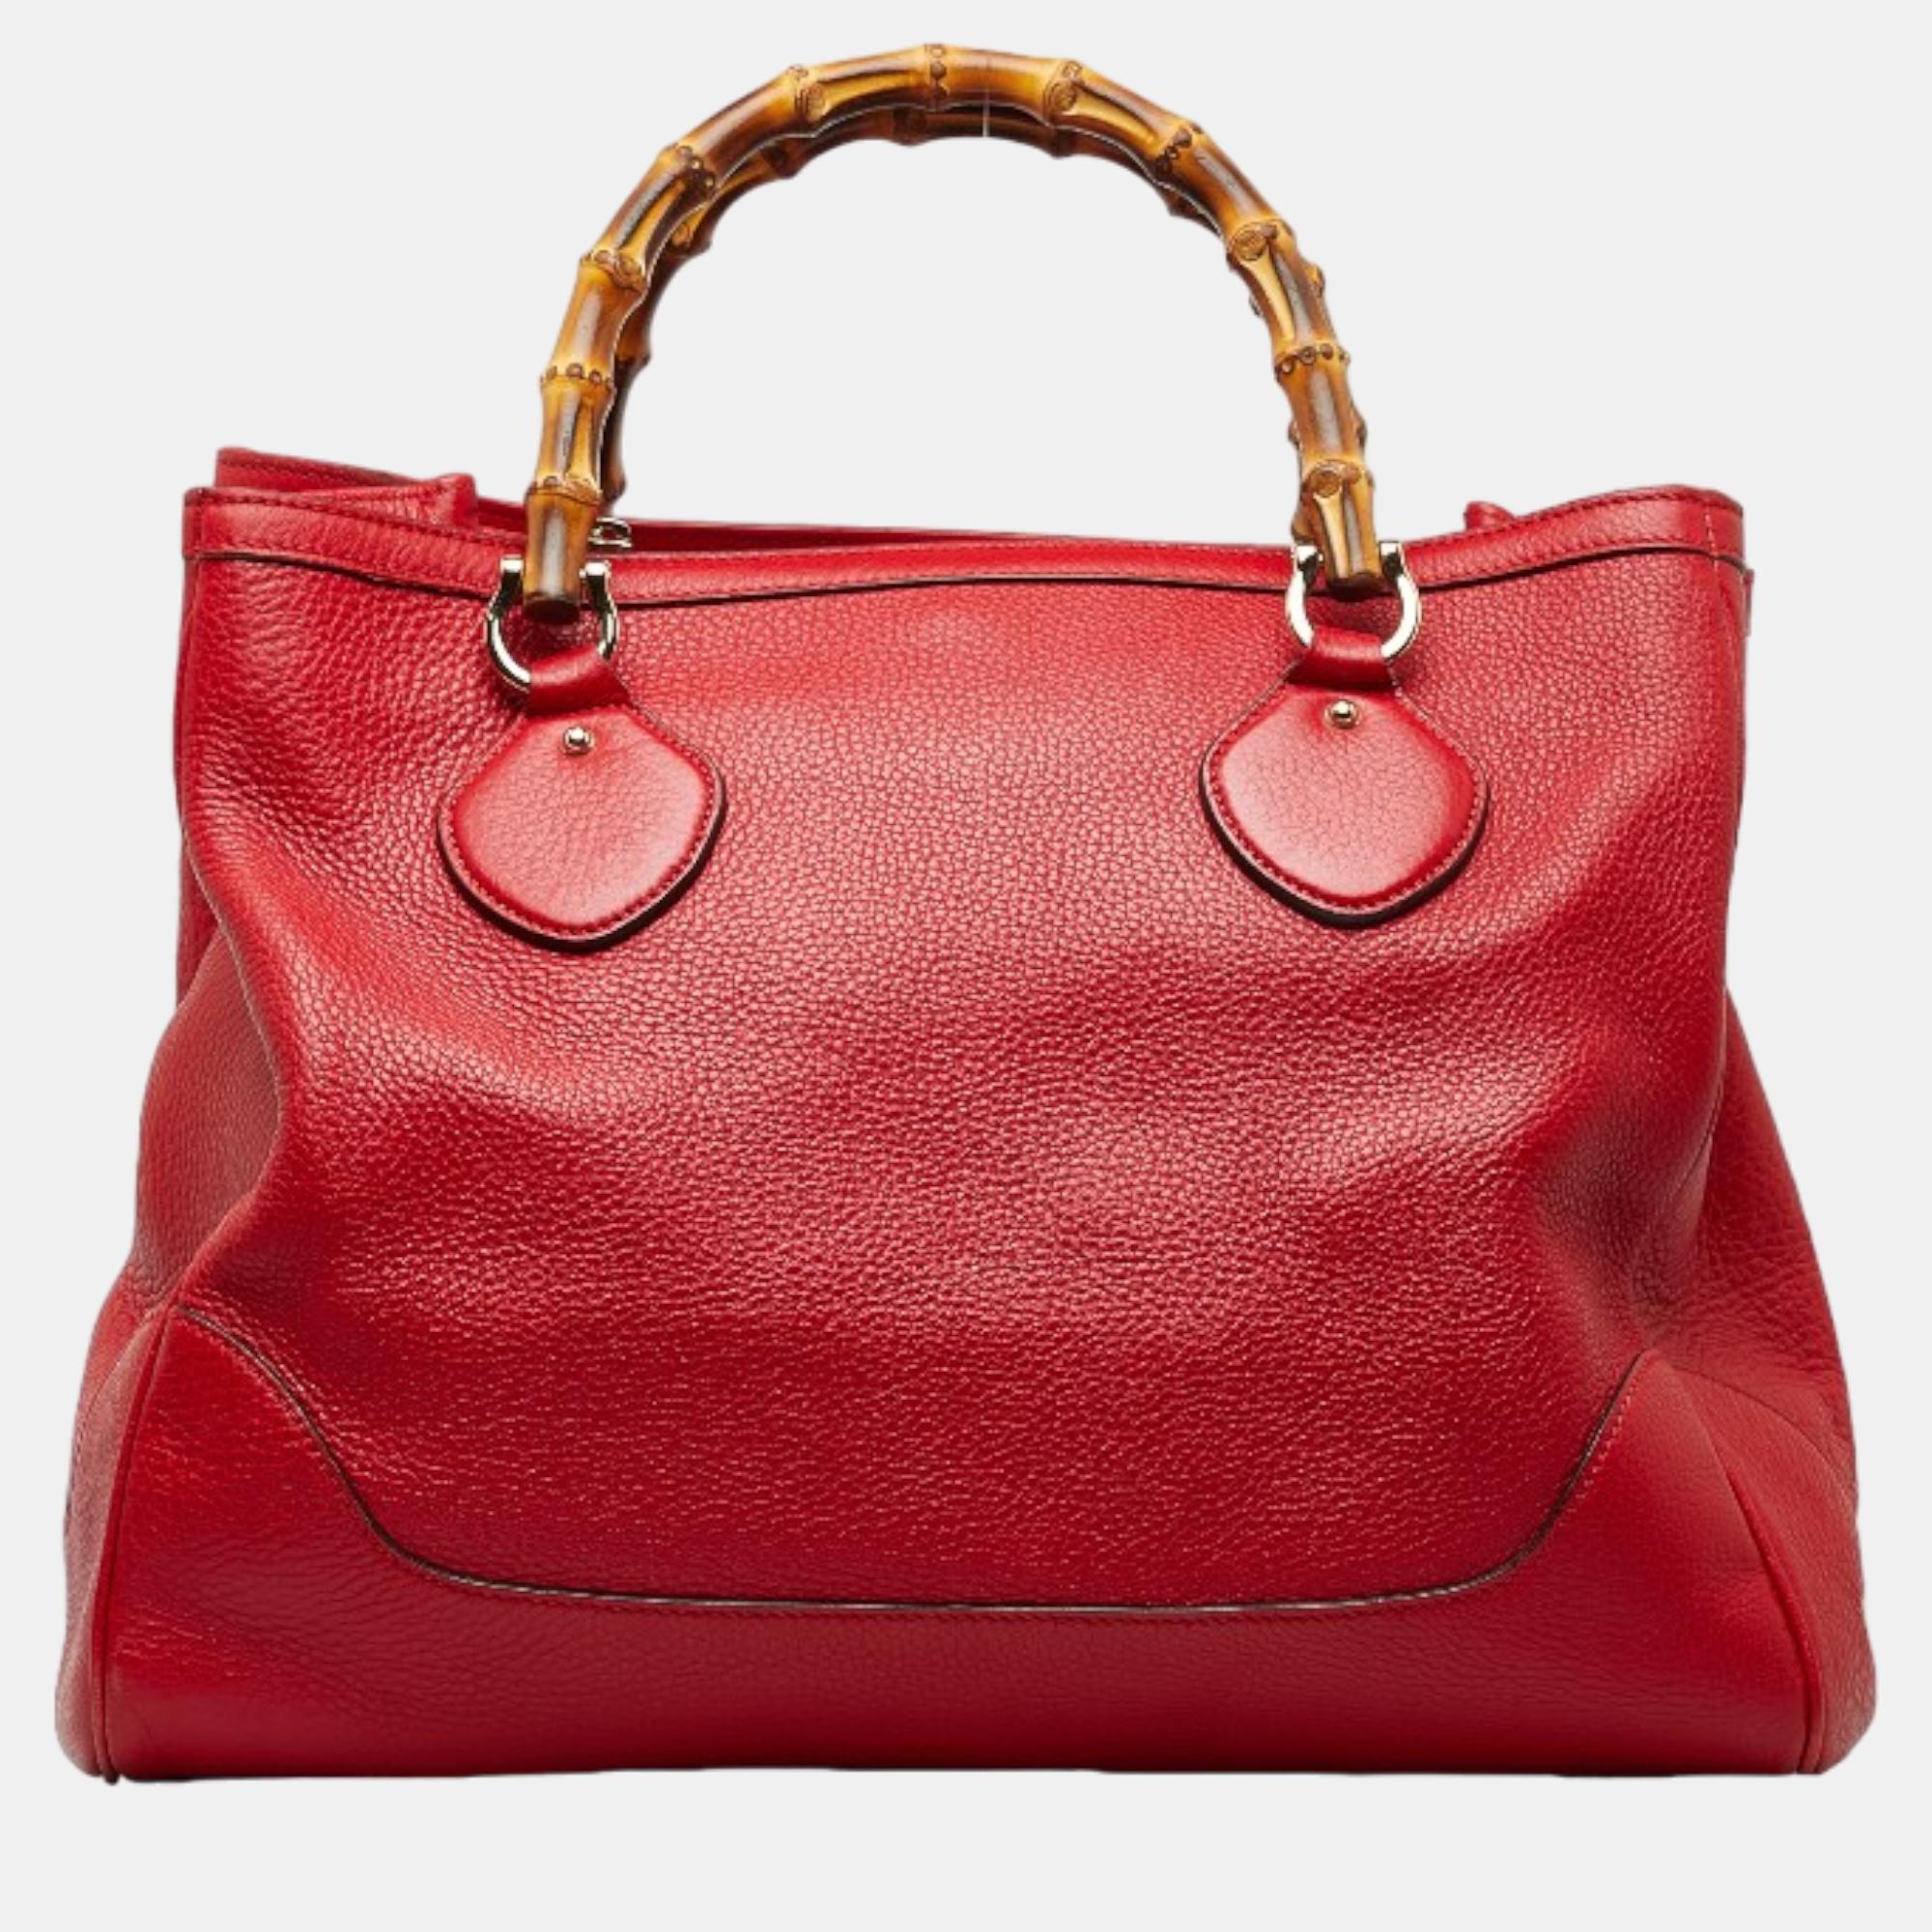 Gucci red leather medium bamboo diana totes